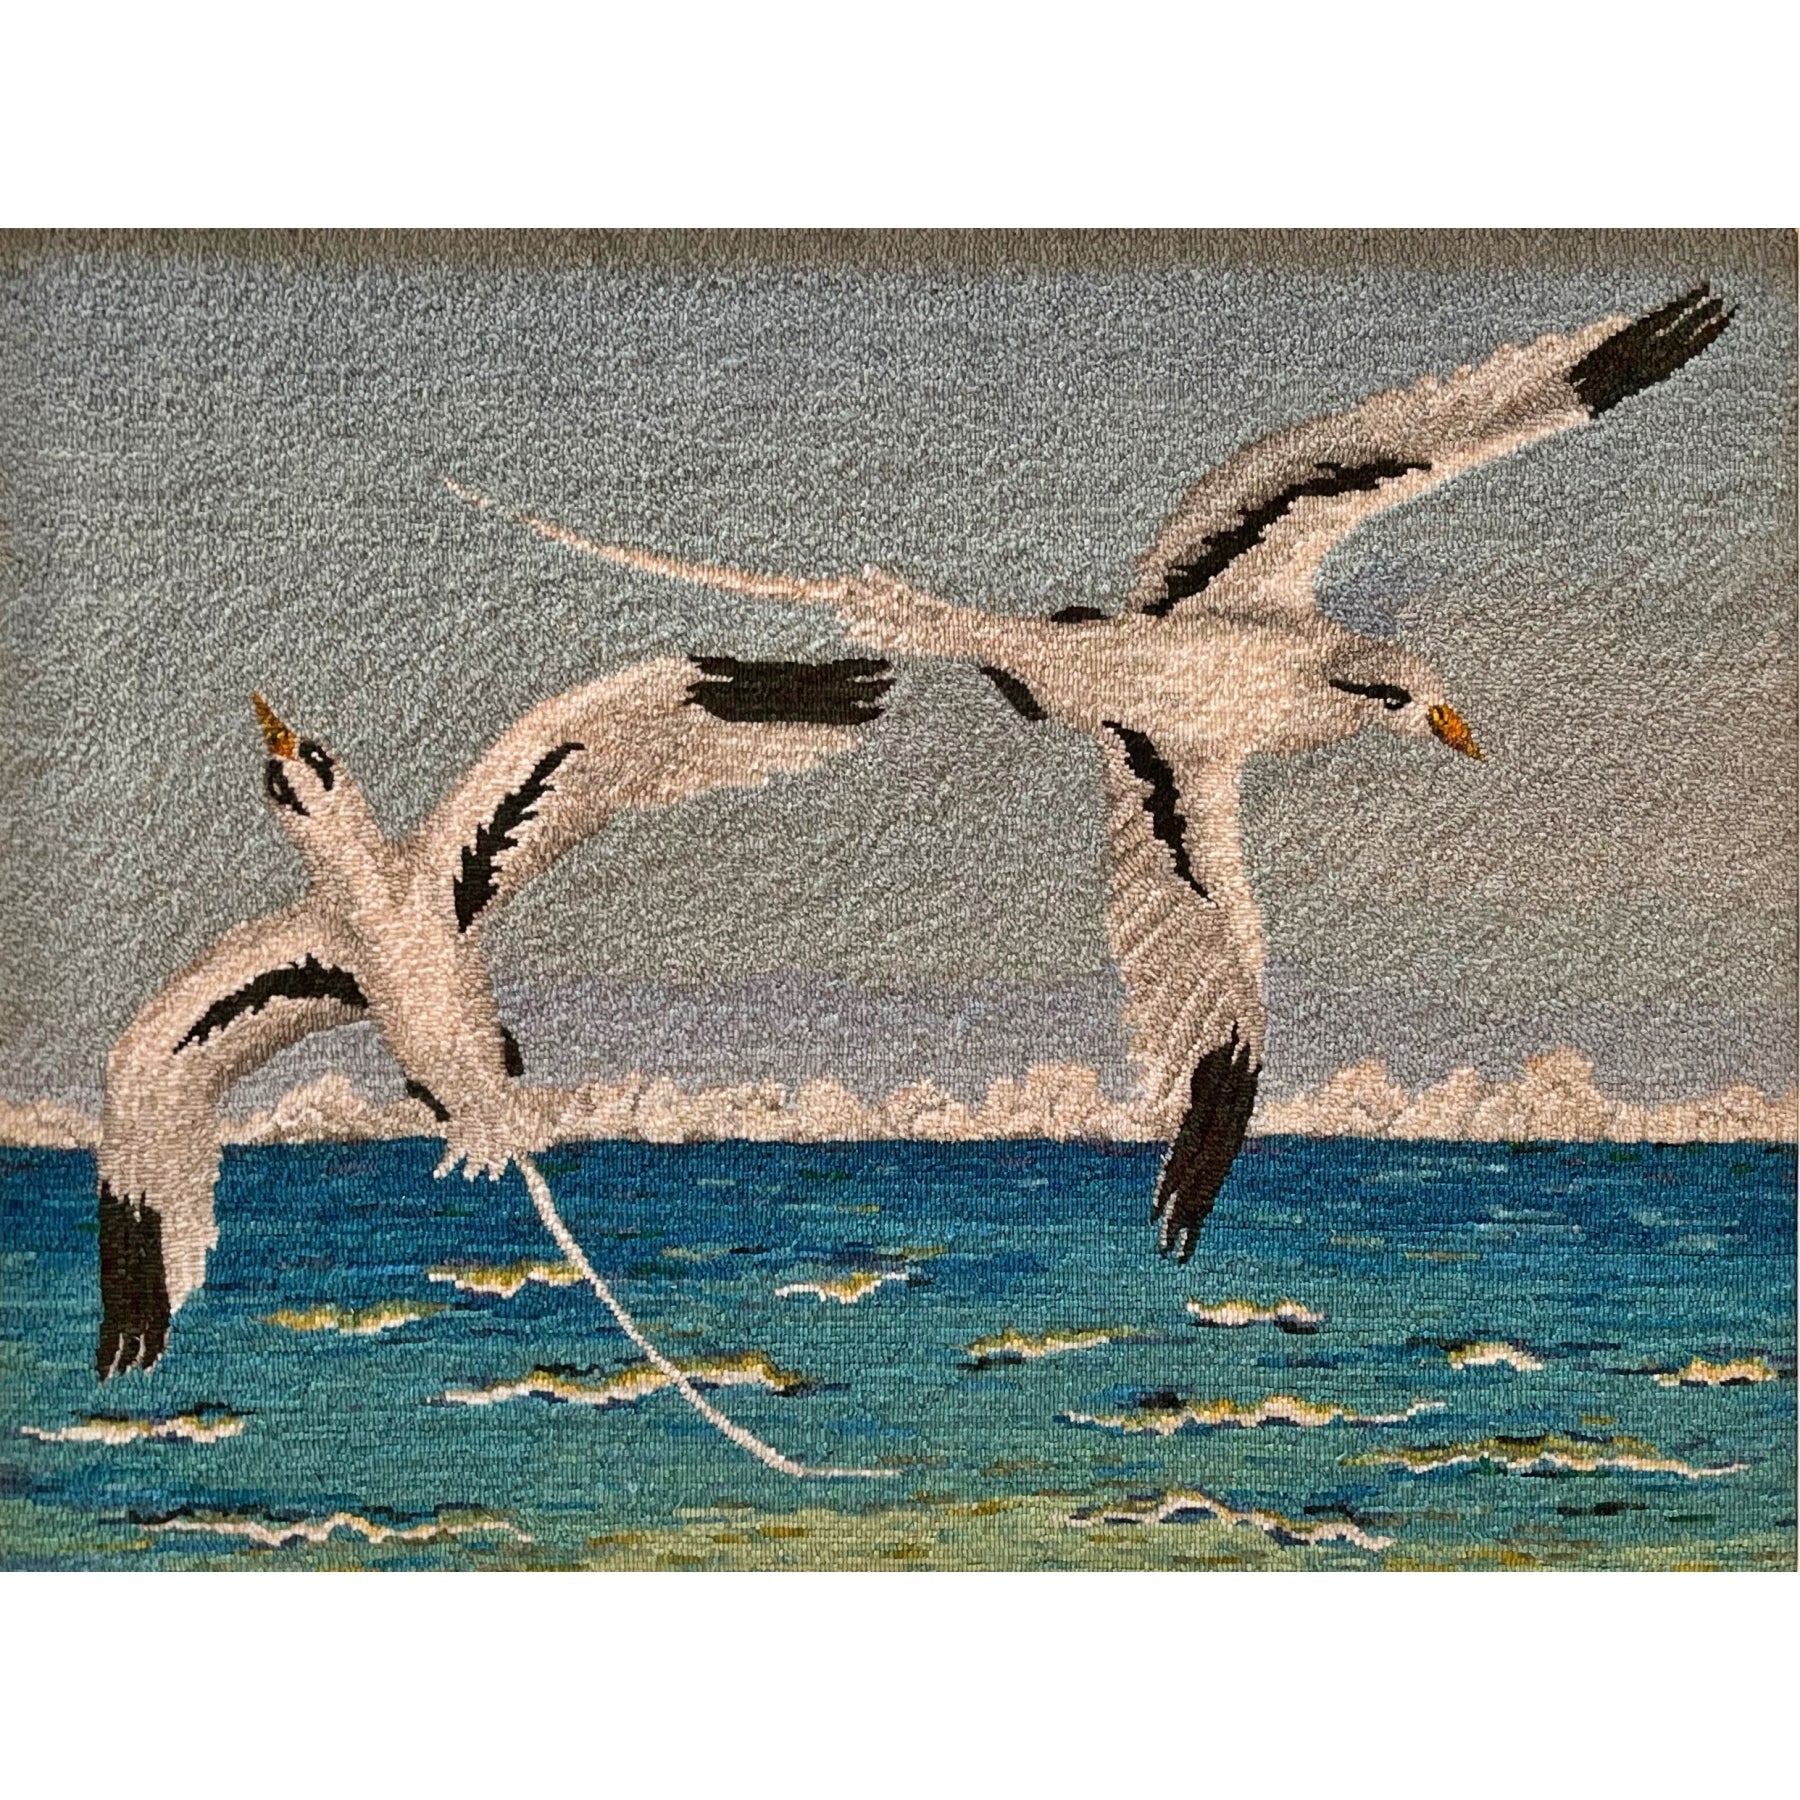 Soaring Longtails, rug hooked by Jane McGown Flynn